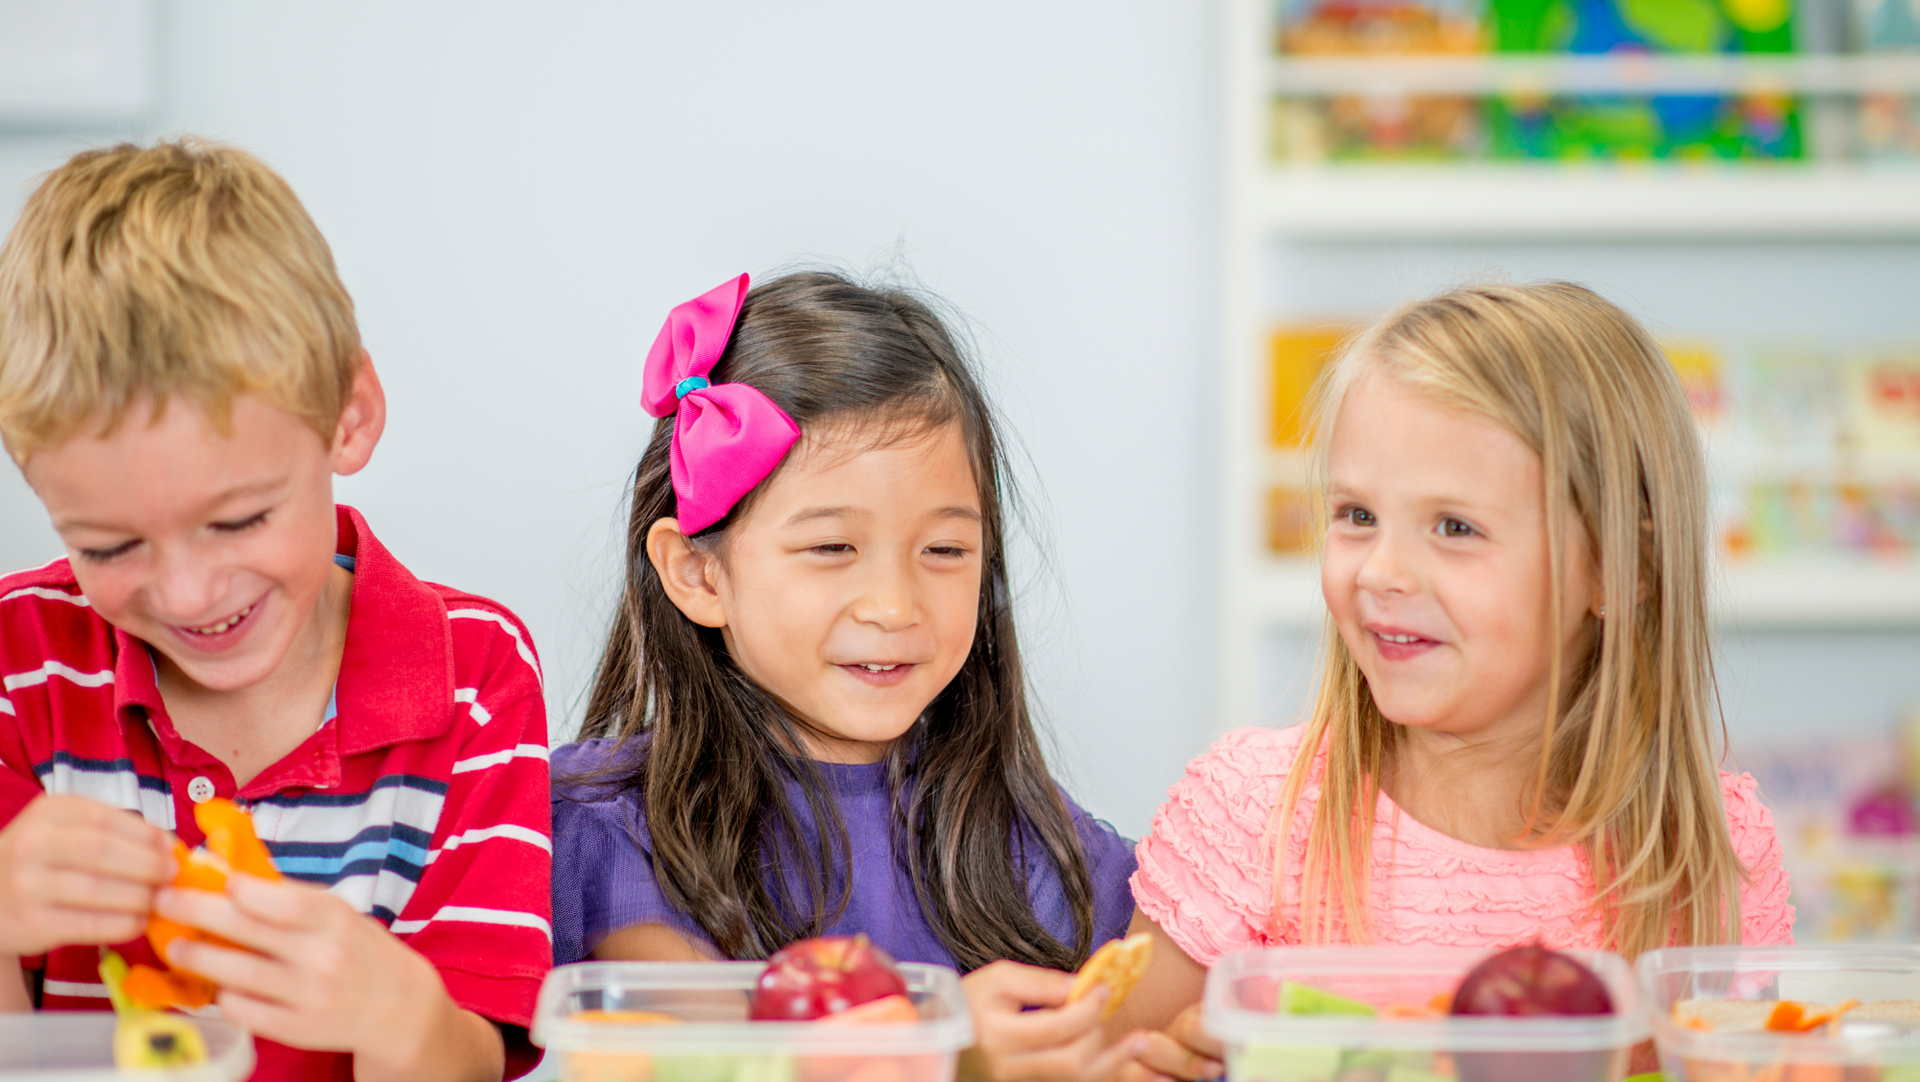 By combining healthy snacks with regular dental care, you can give your child a double-barreled defe